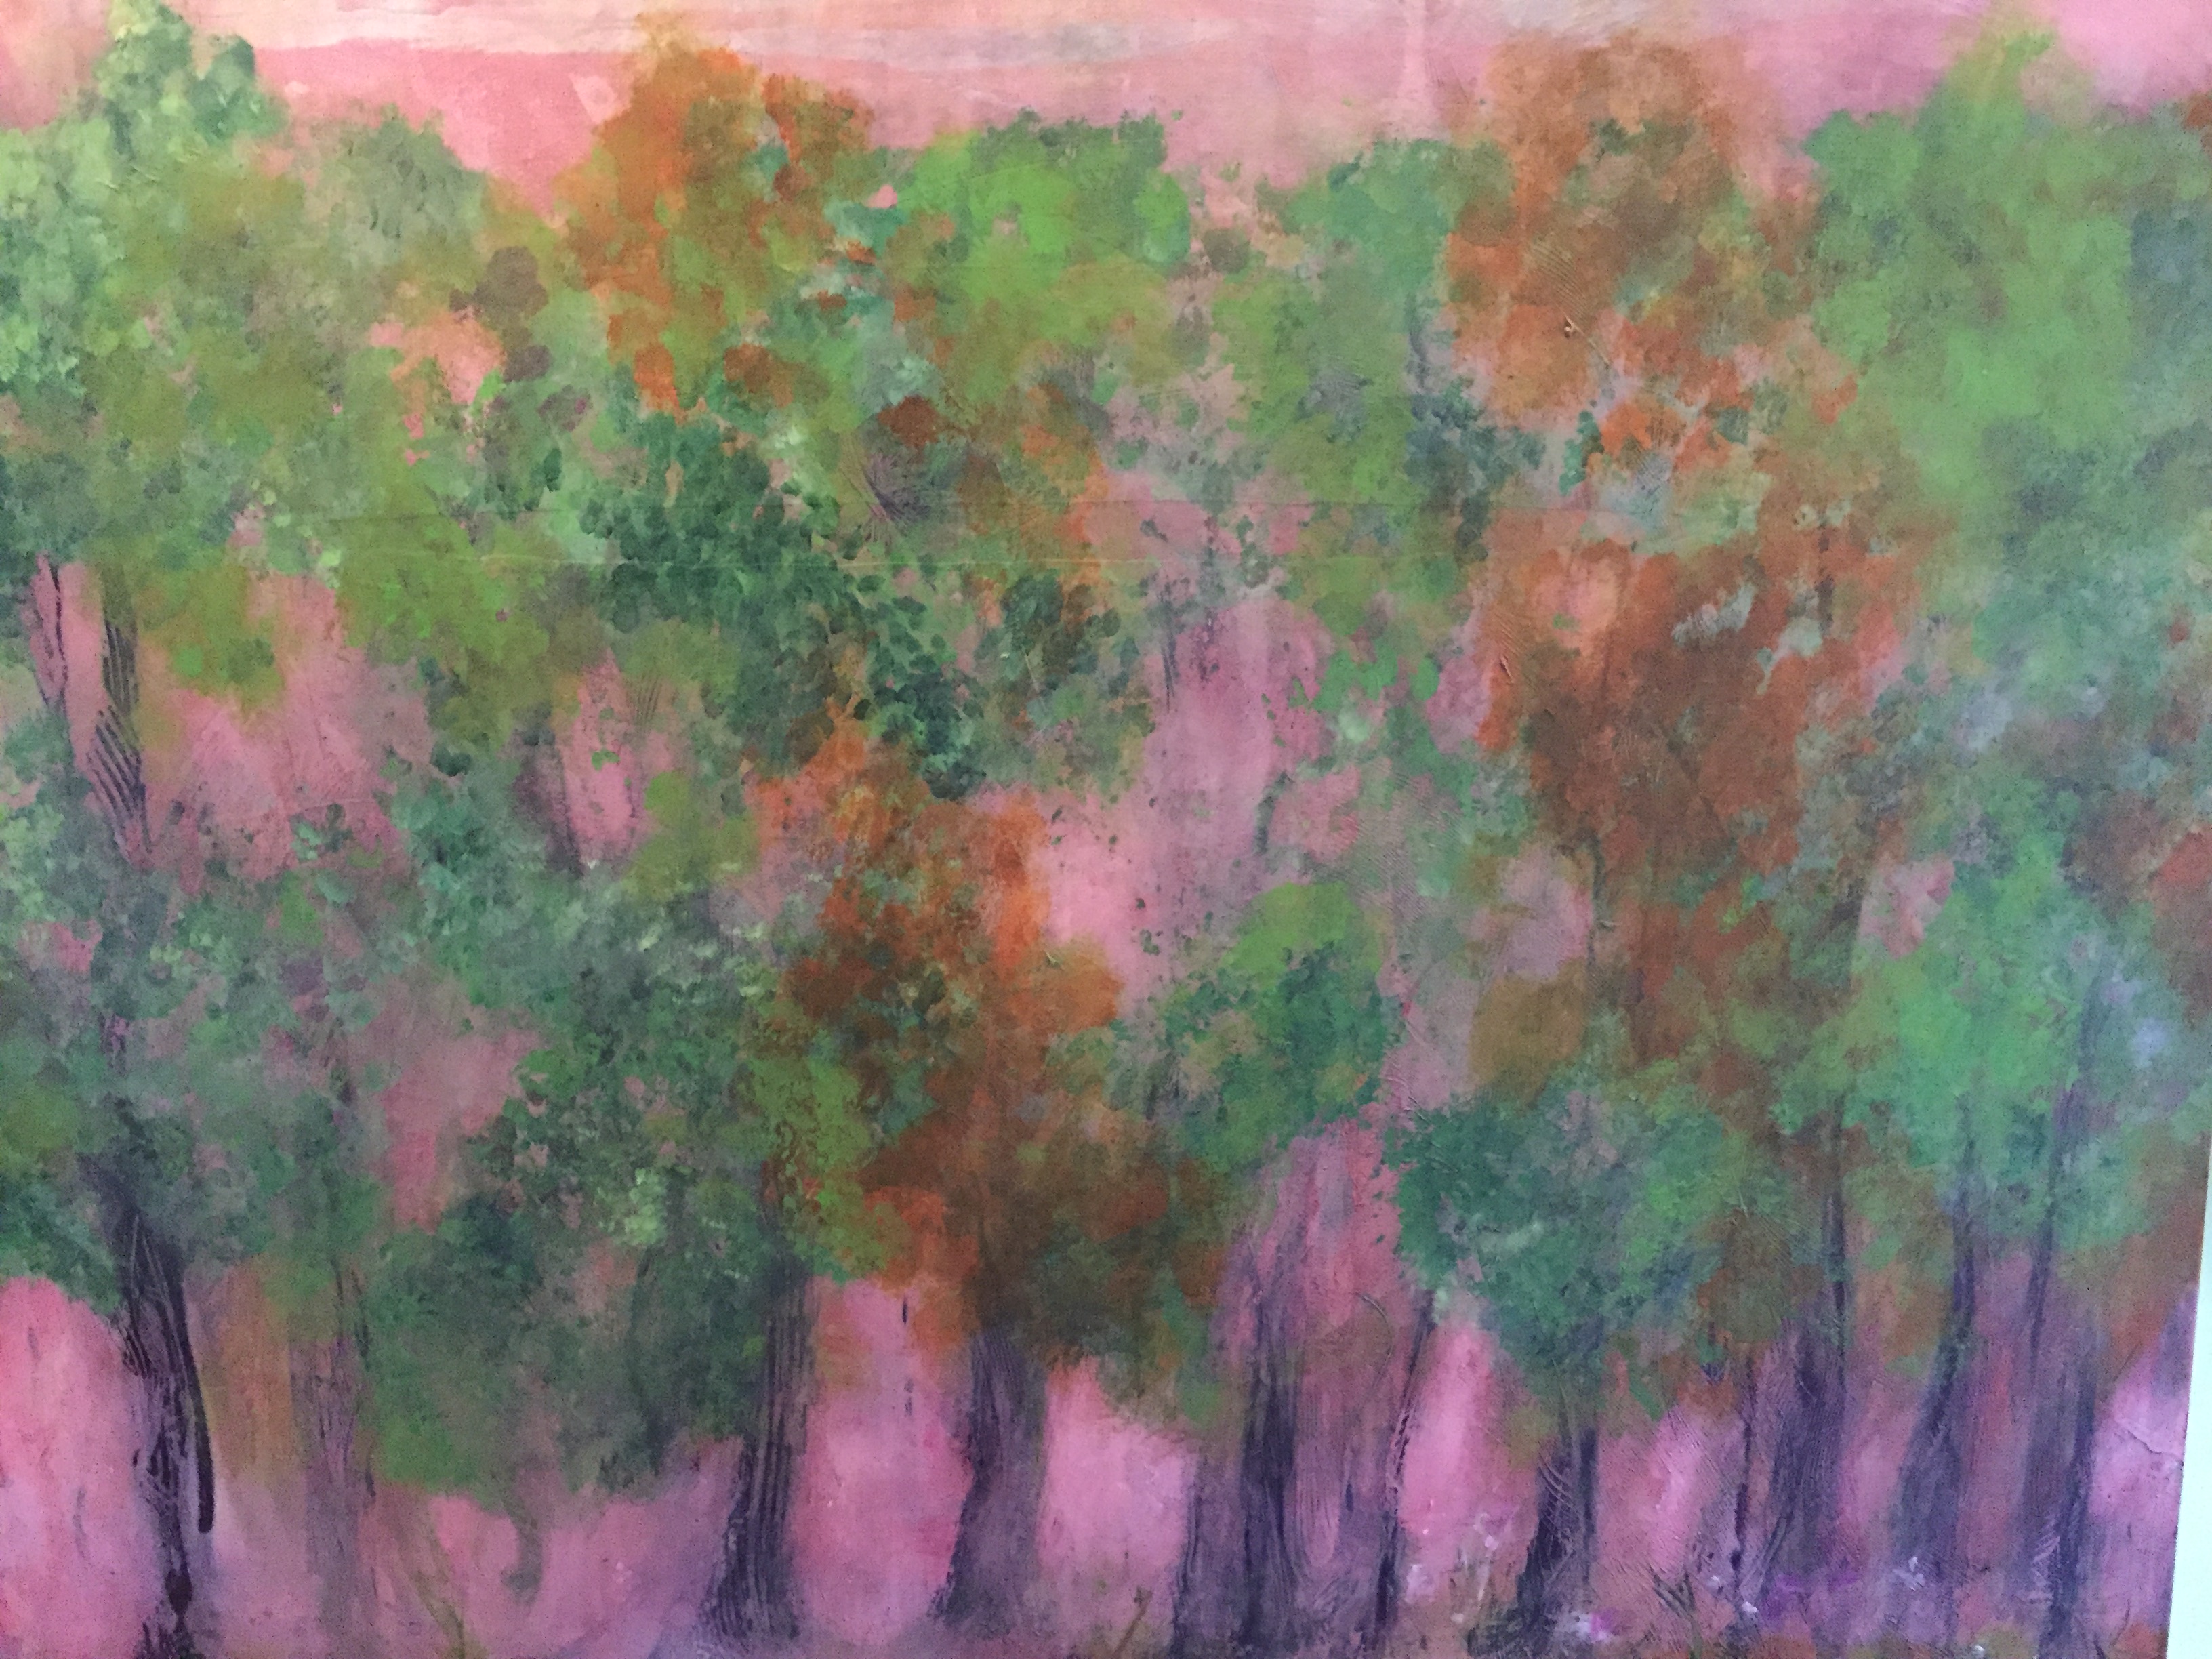 atmospheric, impressionist green trees with mauve flowers/leaves